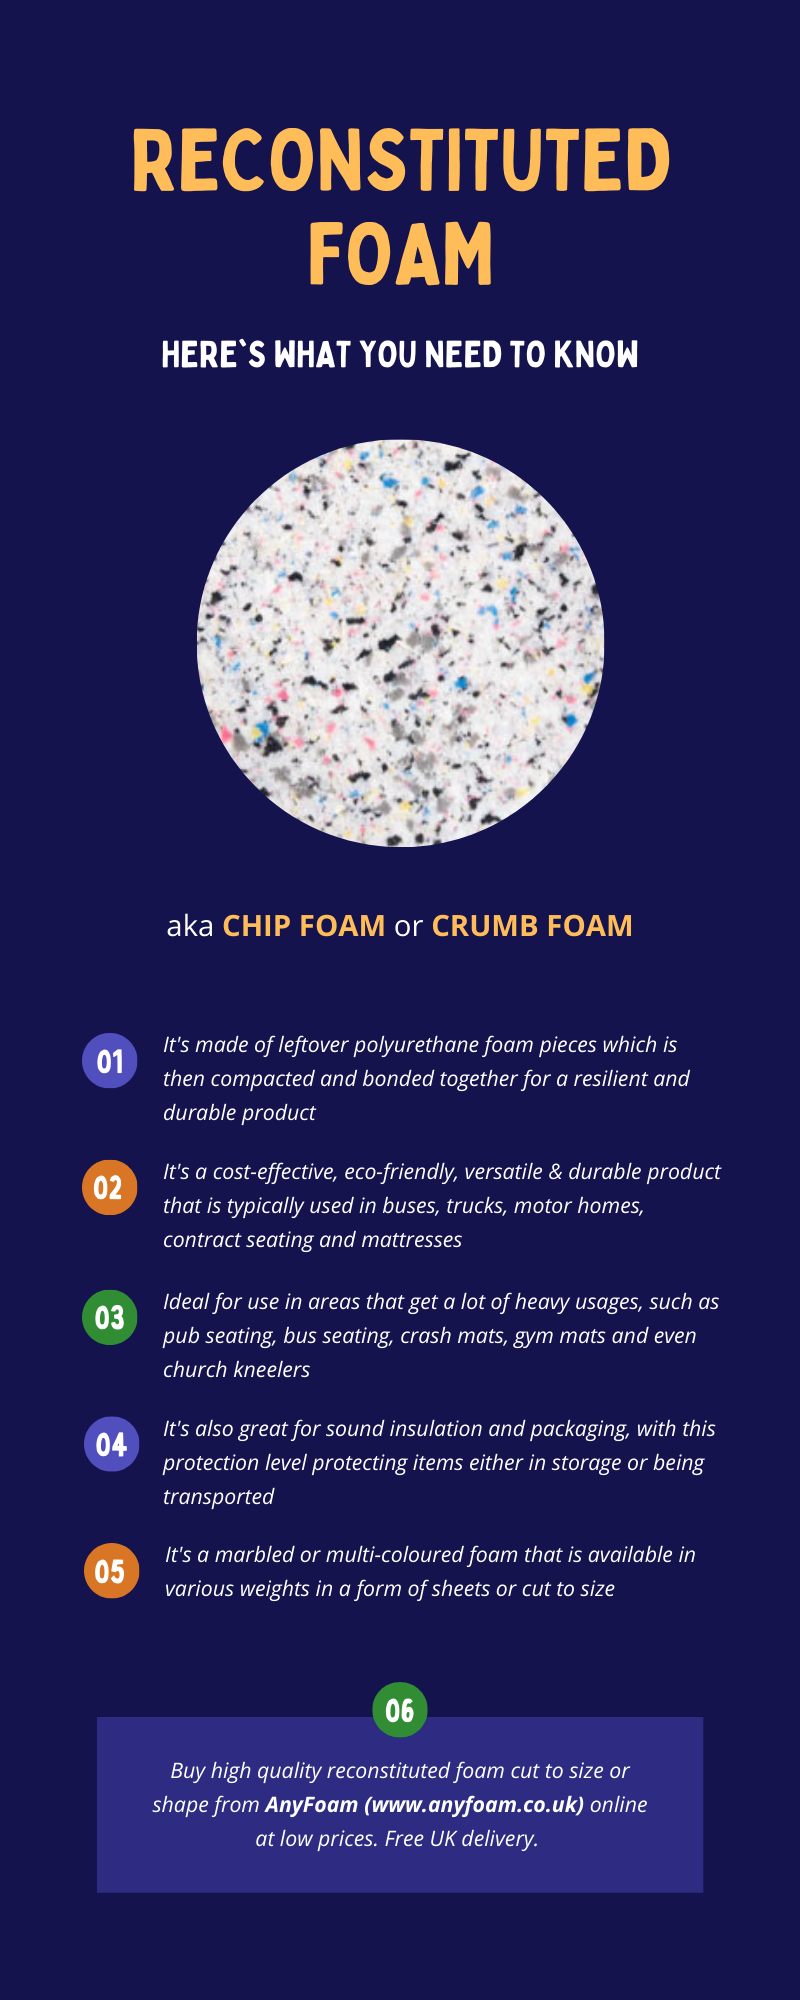 Reconstituted Foam – Here's what you need to know